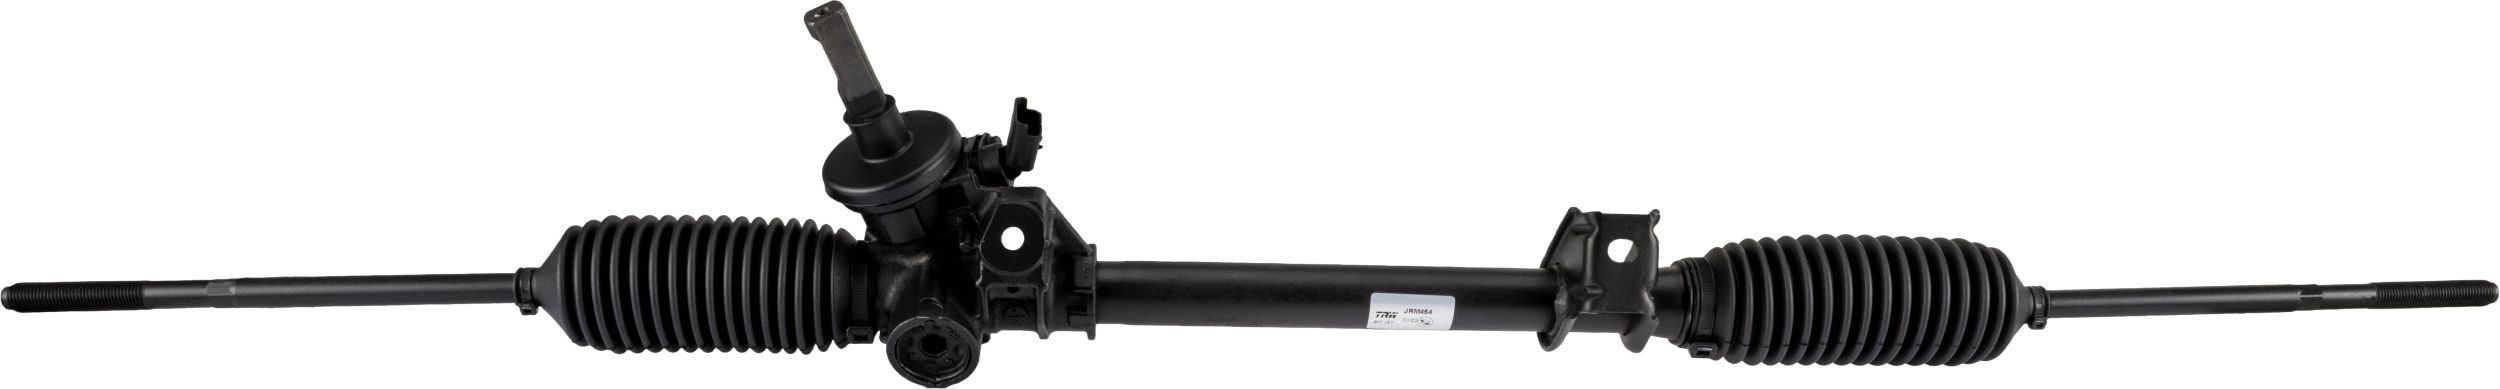 JRM454 TRW Power steering rack HYUNDAI Mechanical, for left-hand drive vehicles, untoothed, 1110 mm